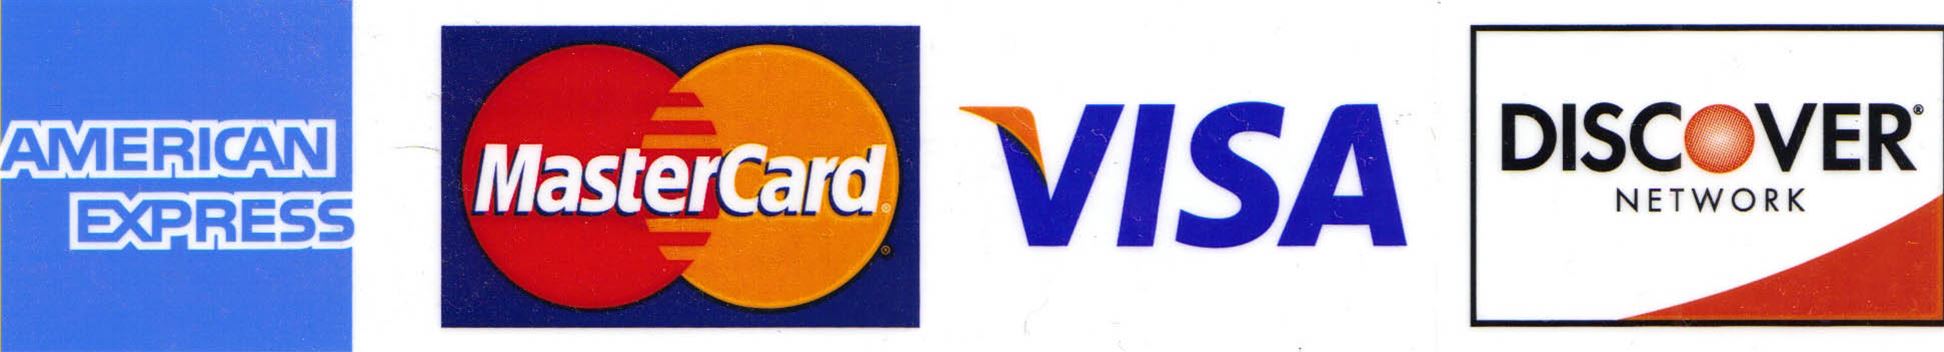 Accepted payment forms: American Express, Mastercard, VISA, and Discover.